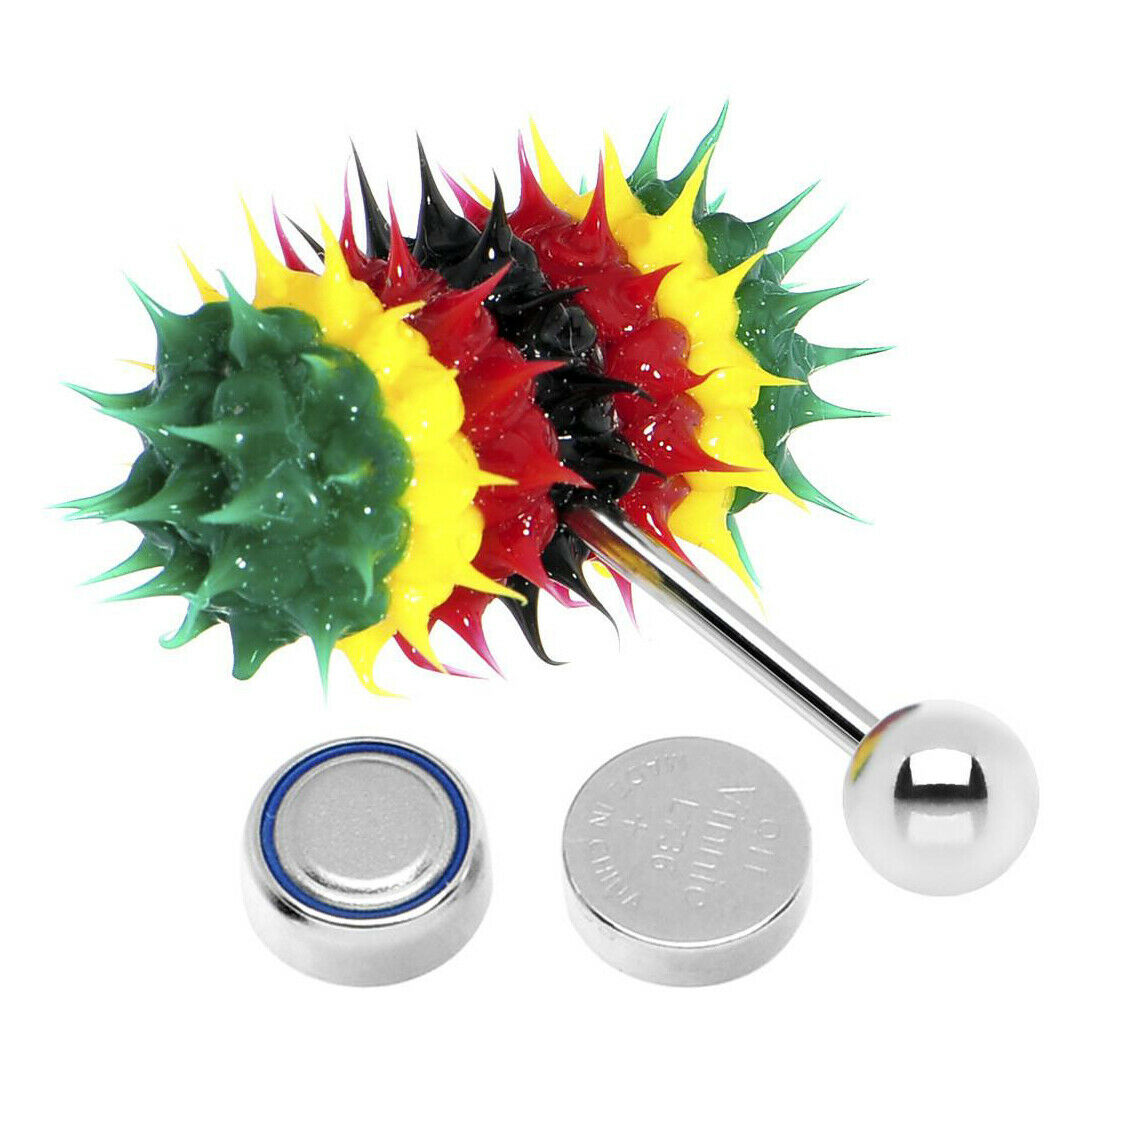 Lix Silicone Spikes Vibrator Tongue Ring Rasta Colors 14G